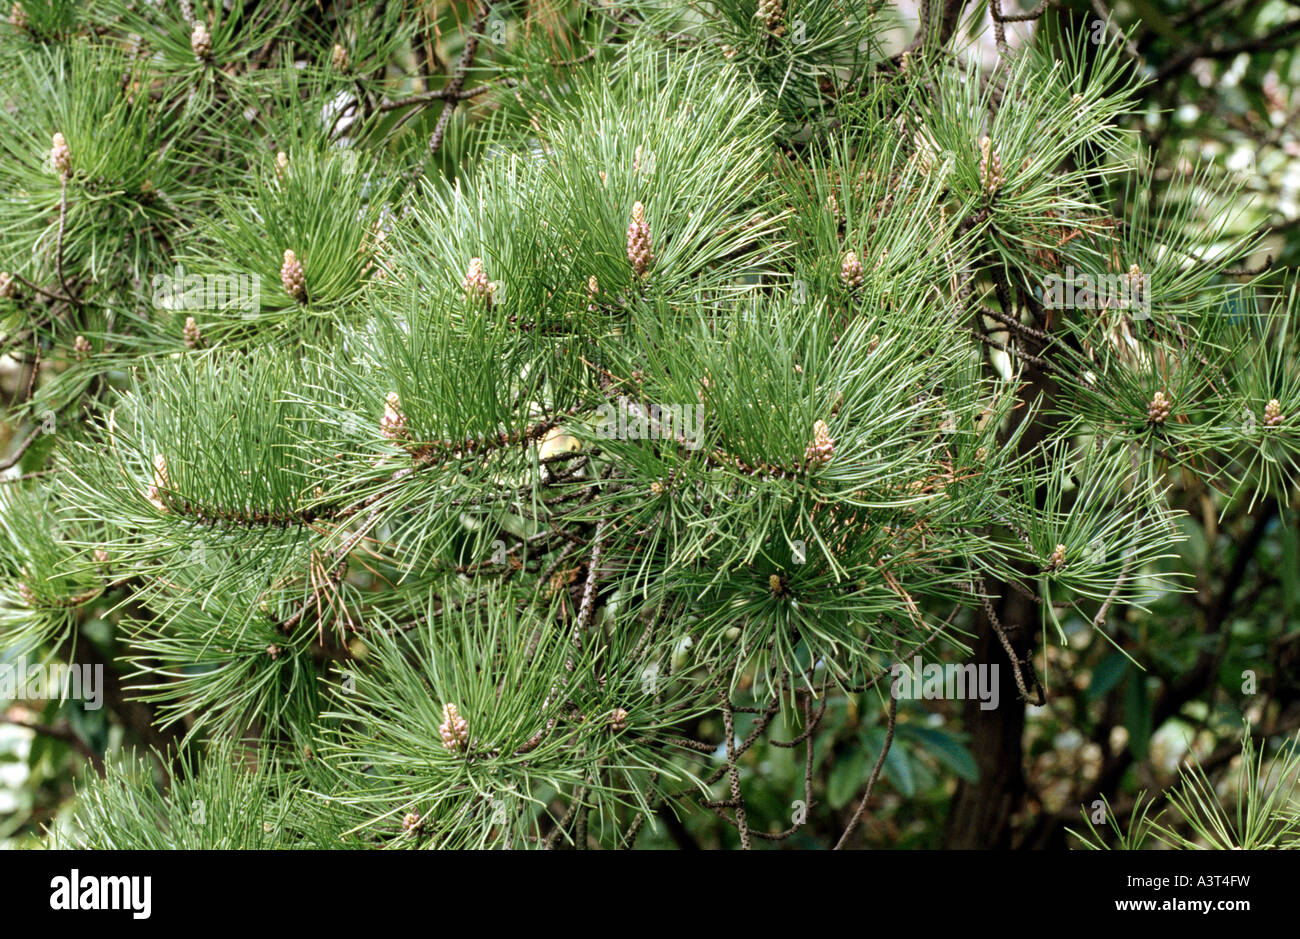 northern pine, pitch pine (Pinus rigida), branch with male inflorescences Stock Photo